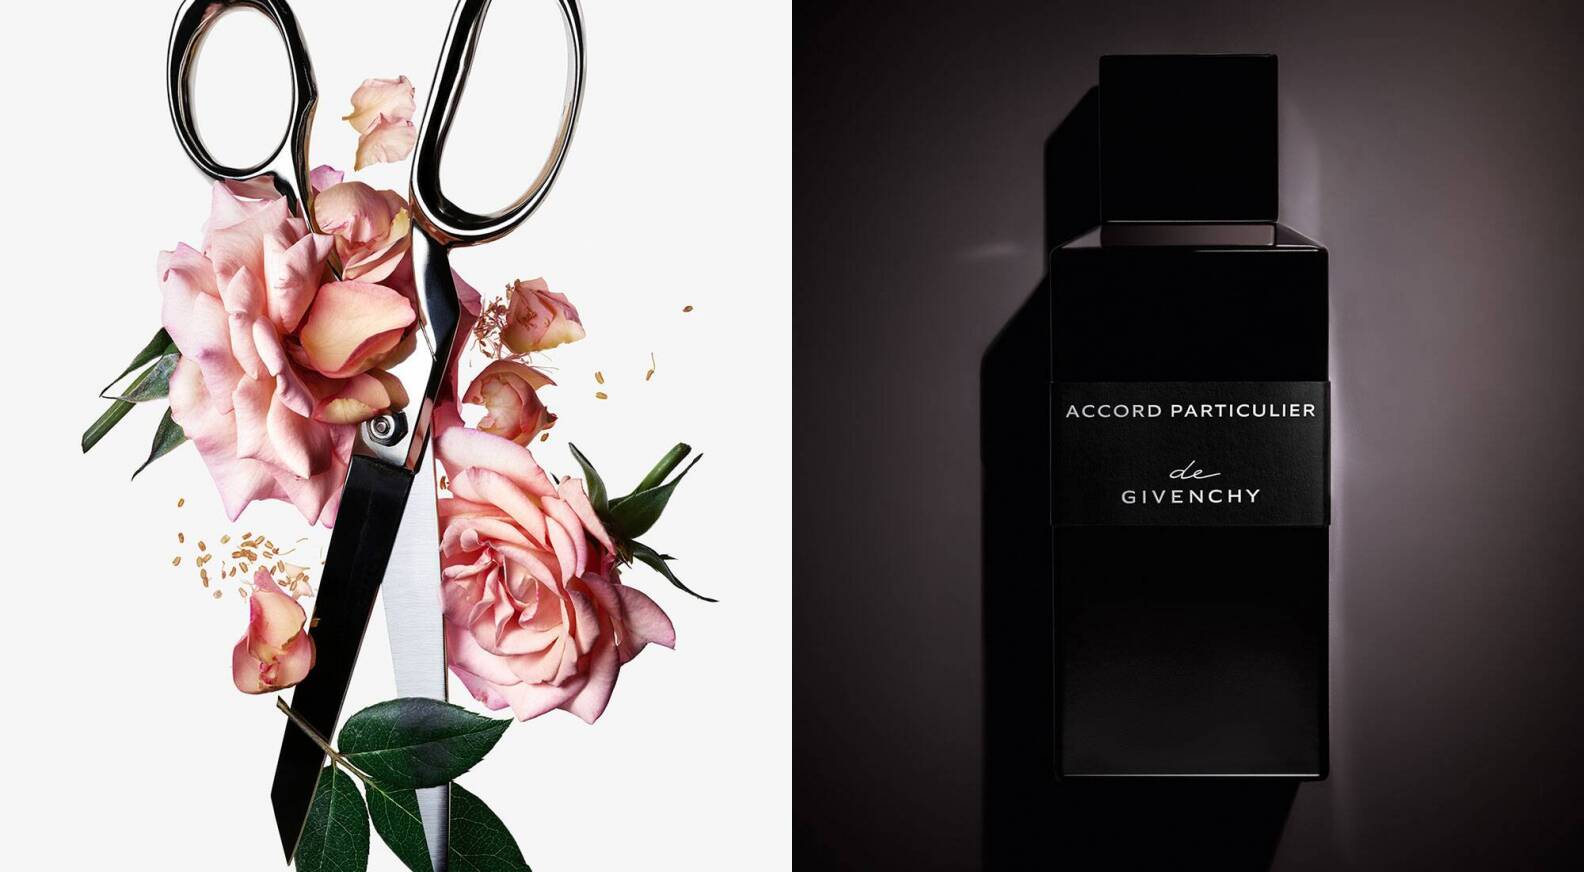 Parfums Givenchy presents La Collection 